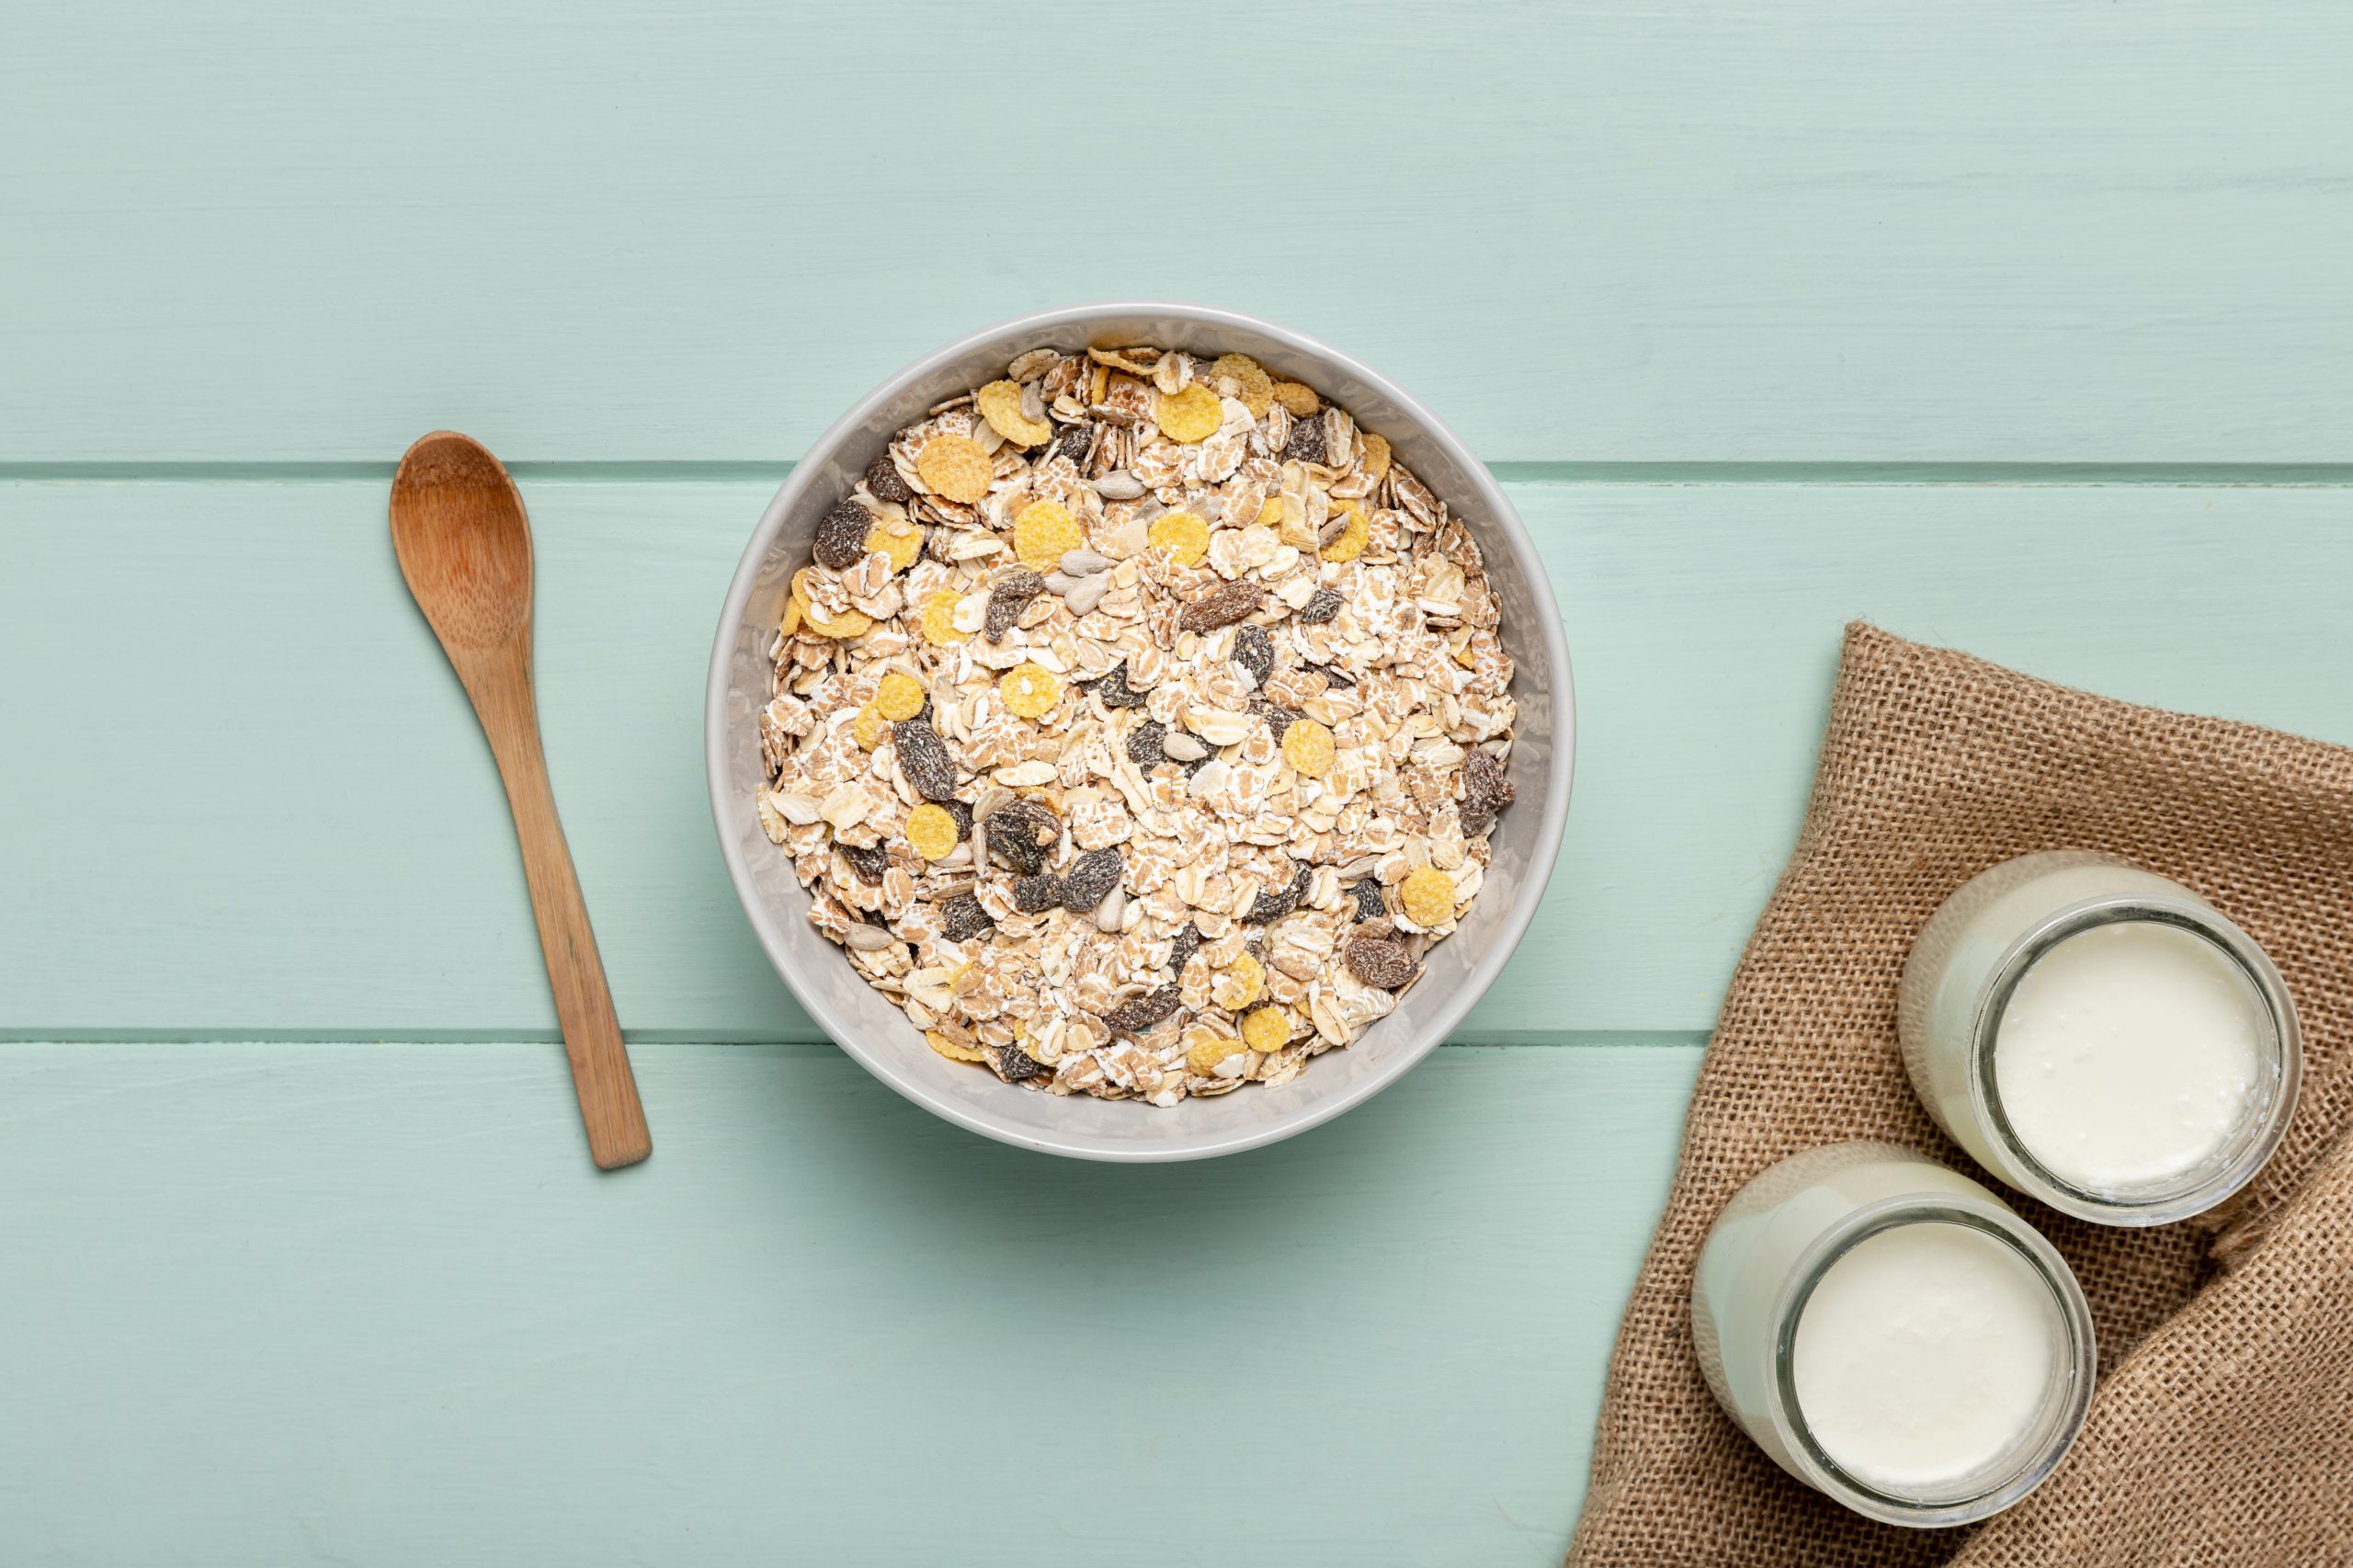 Millet flakes for breakfast? Here’s all you need to know